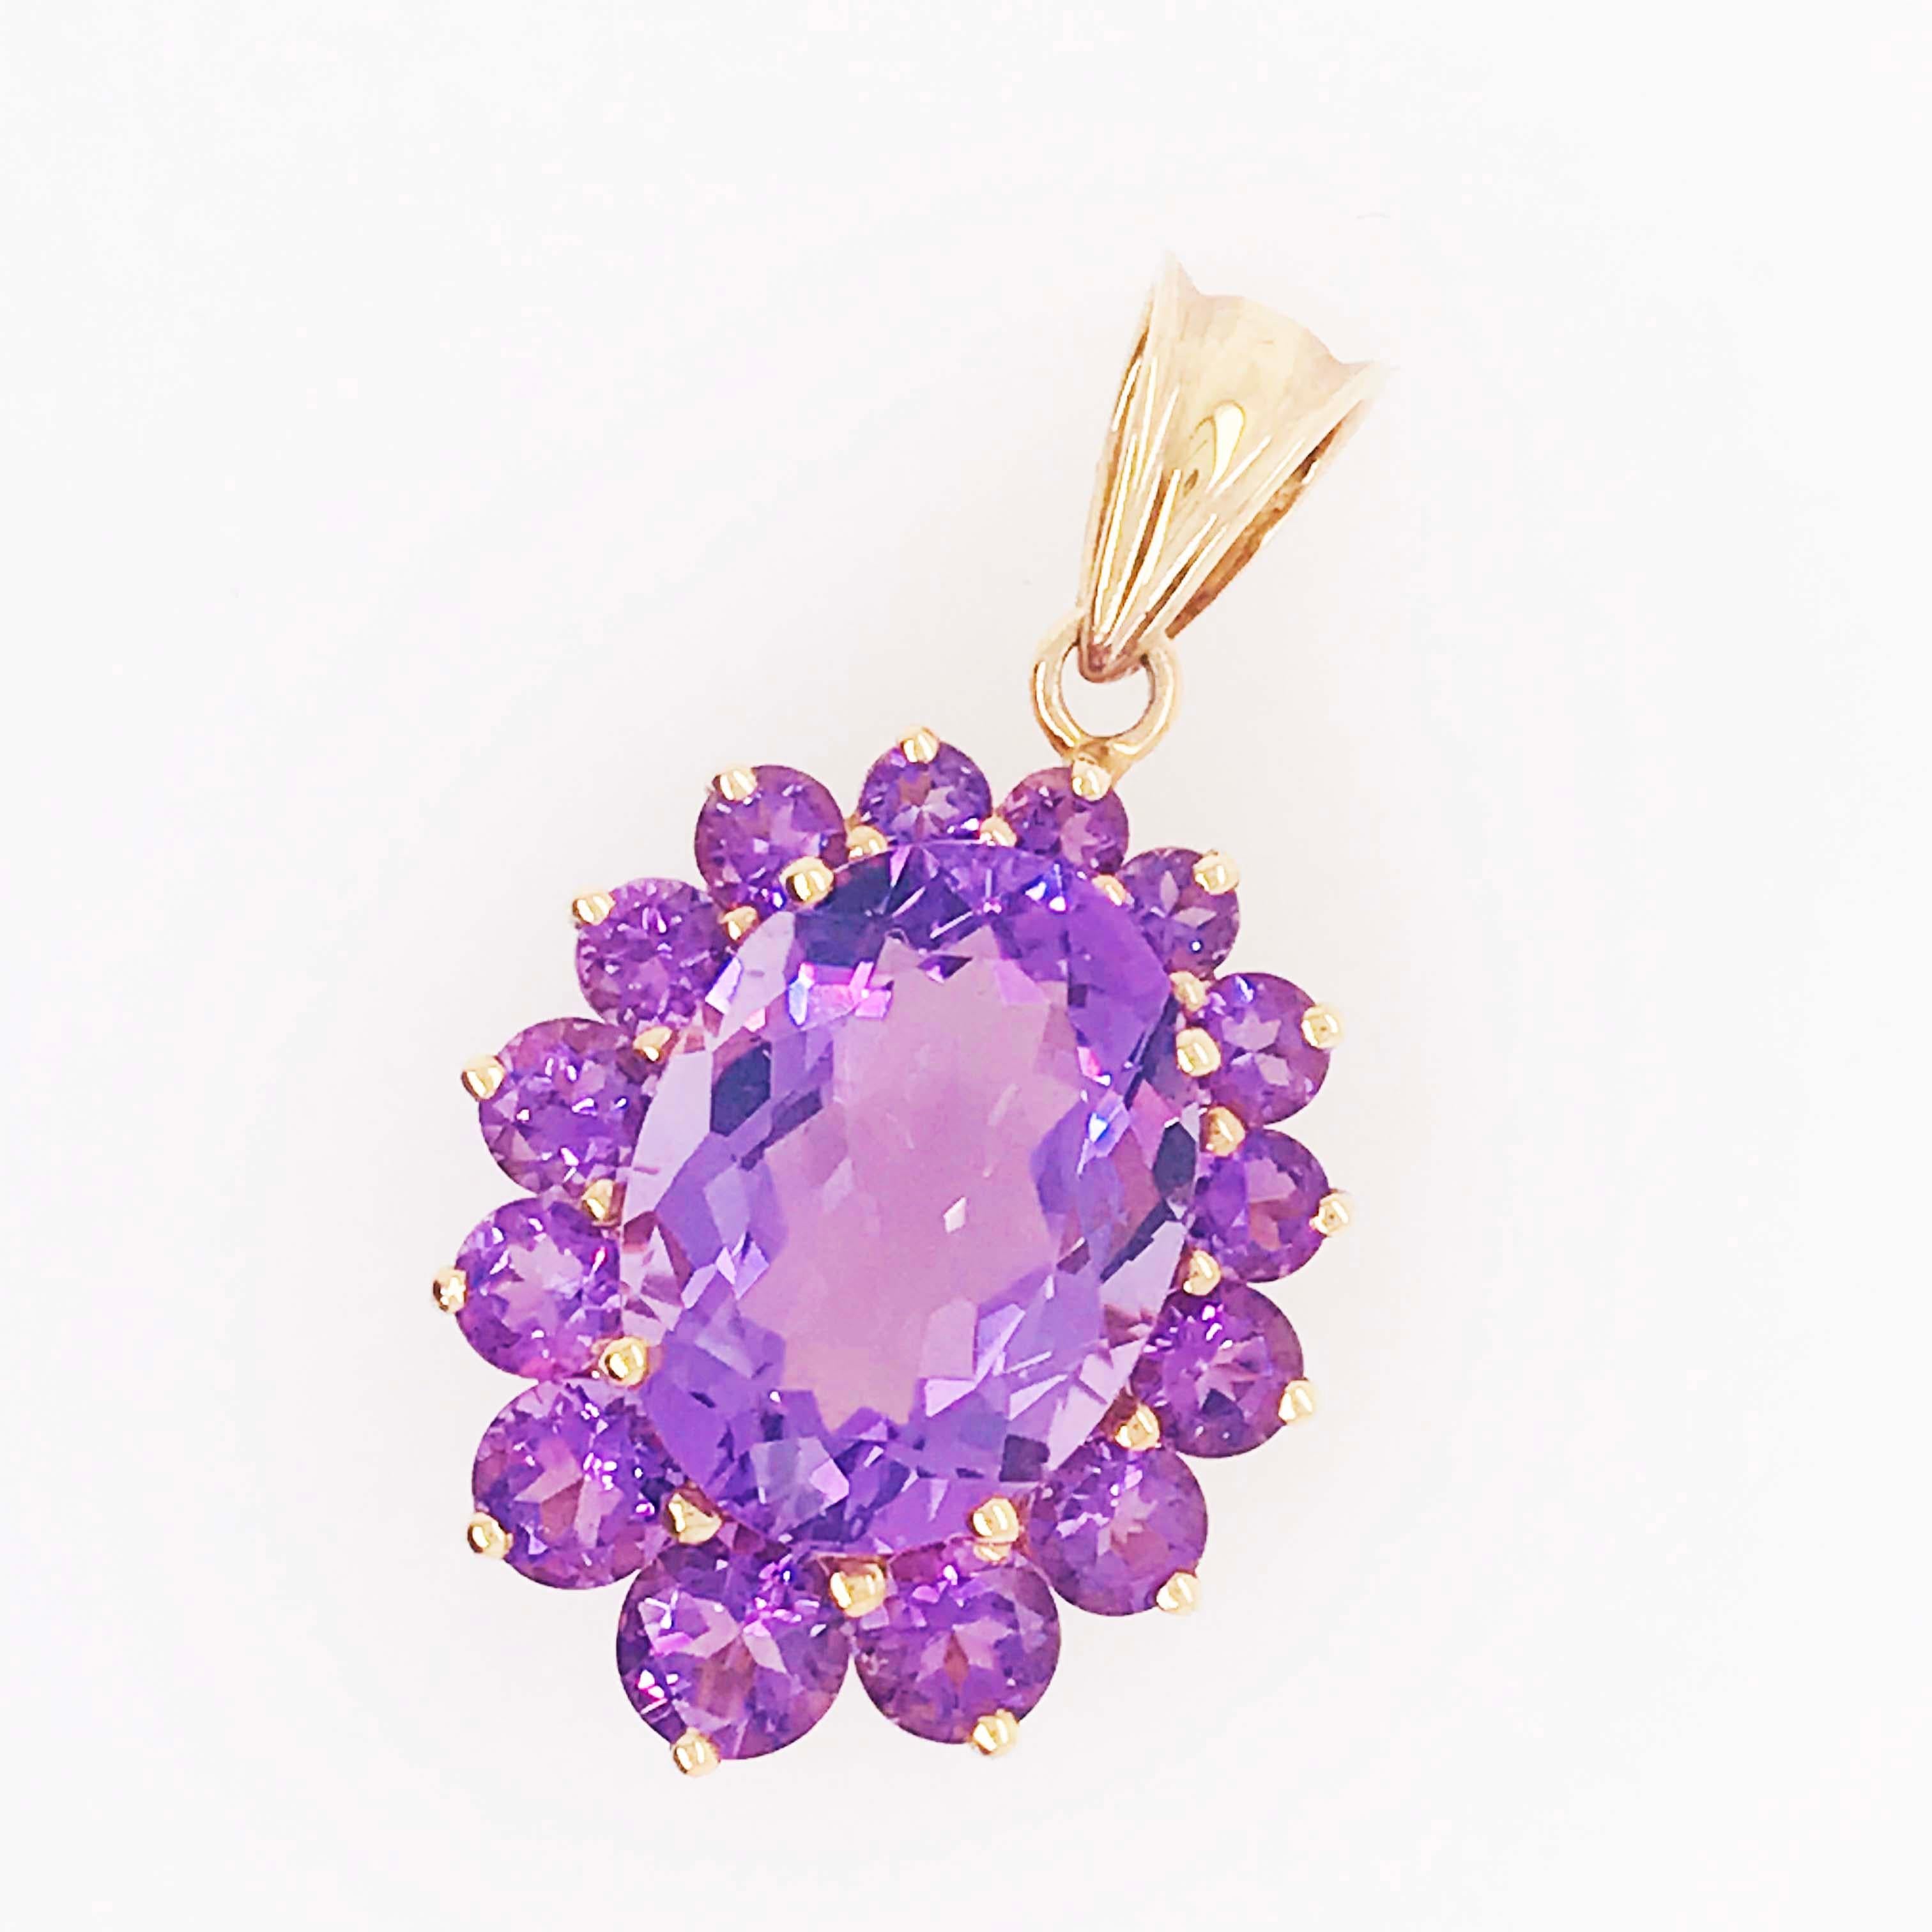 12 Carat Oval and Round Amethyst Custom Women's Power Pendant or Women’s Rights 3